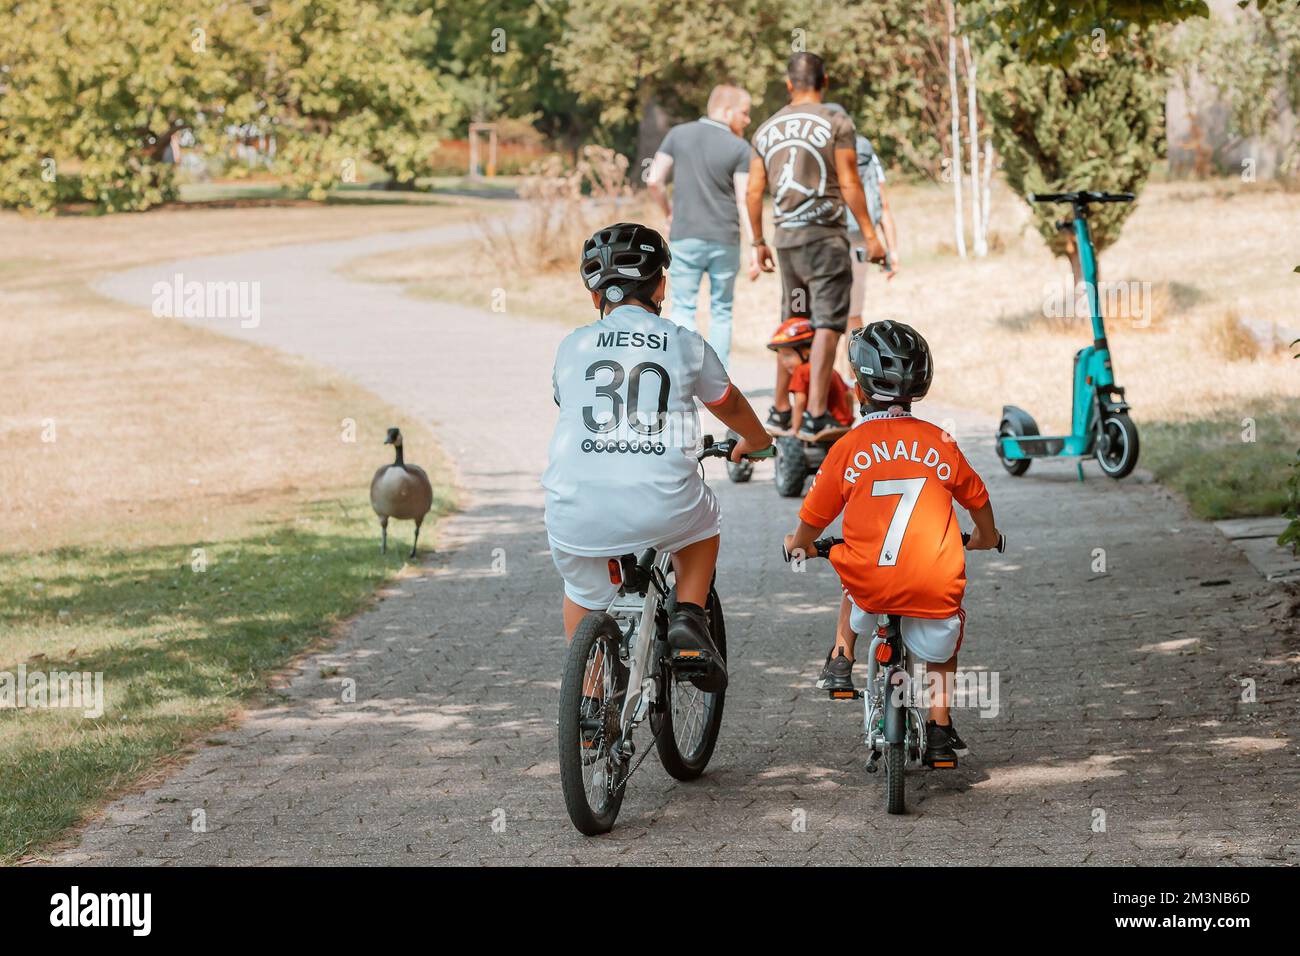 30 July 2022, Cologne, Germany: Two children friends ride bicycles in the park and compete like Messi versus Ronaldo with their numbers and names on T Stock Photo